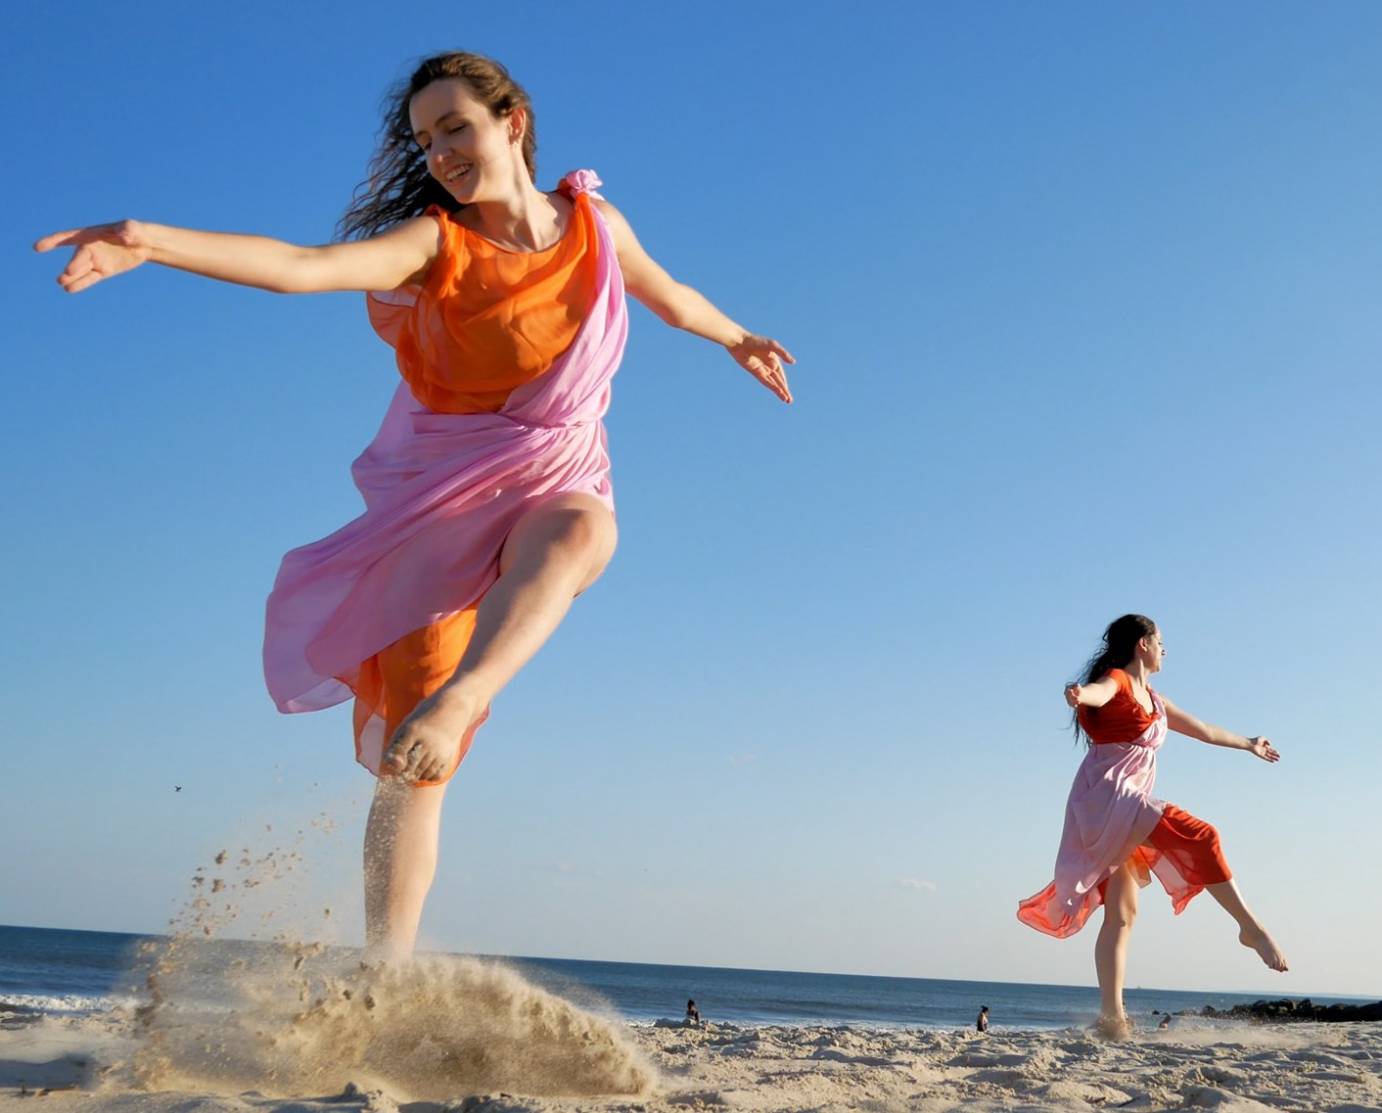 Against a blue sky, two women in orange and pink Grecian tunics lift opposite legs in attitude while smiling. 